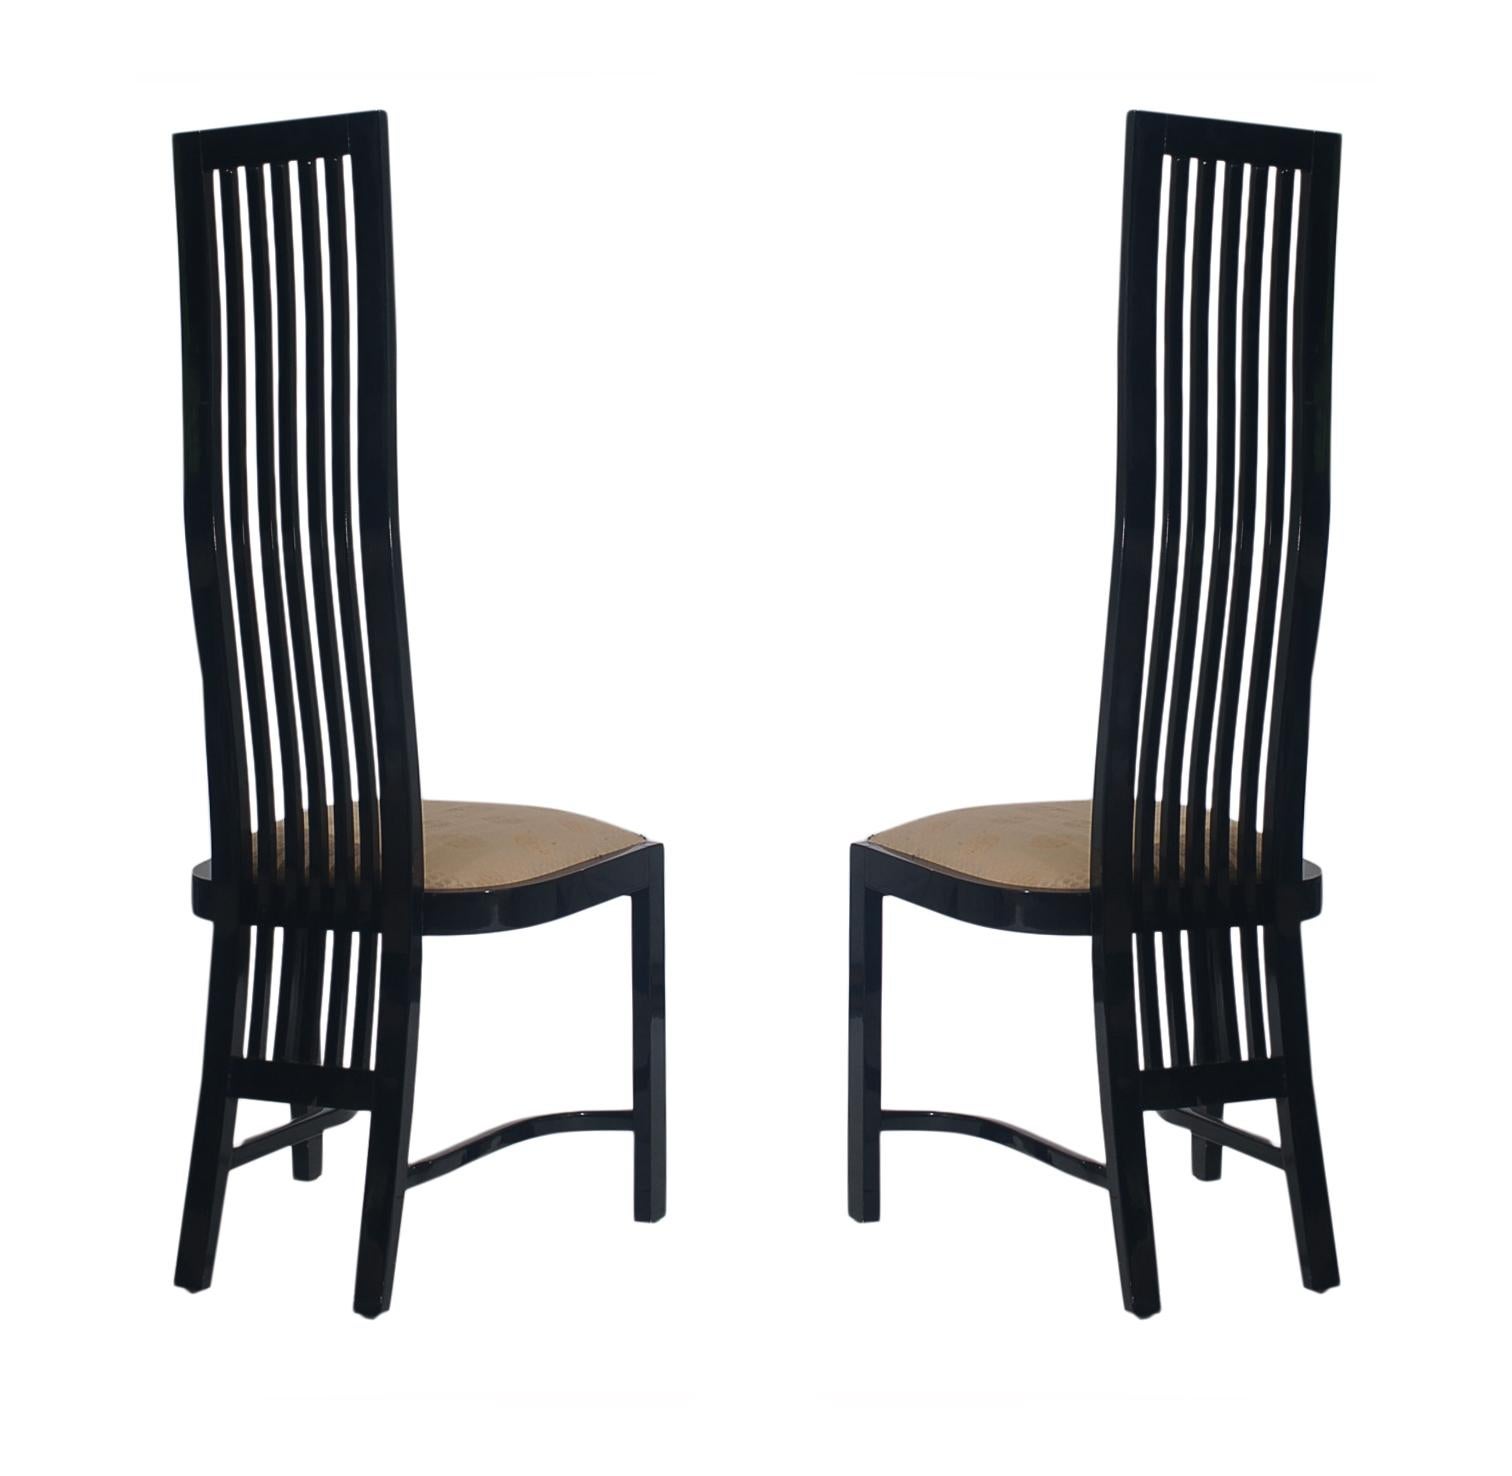 A dramatic set of 8 matching dining chairs that were produced in Spain in the late 1980s. They feature solid wood construction with gloss black lacquer. Seat cushion have some minor soiling and could use updating. Otherwise, in very good condition.